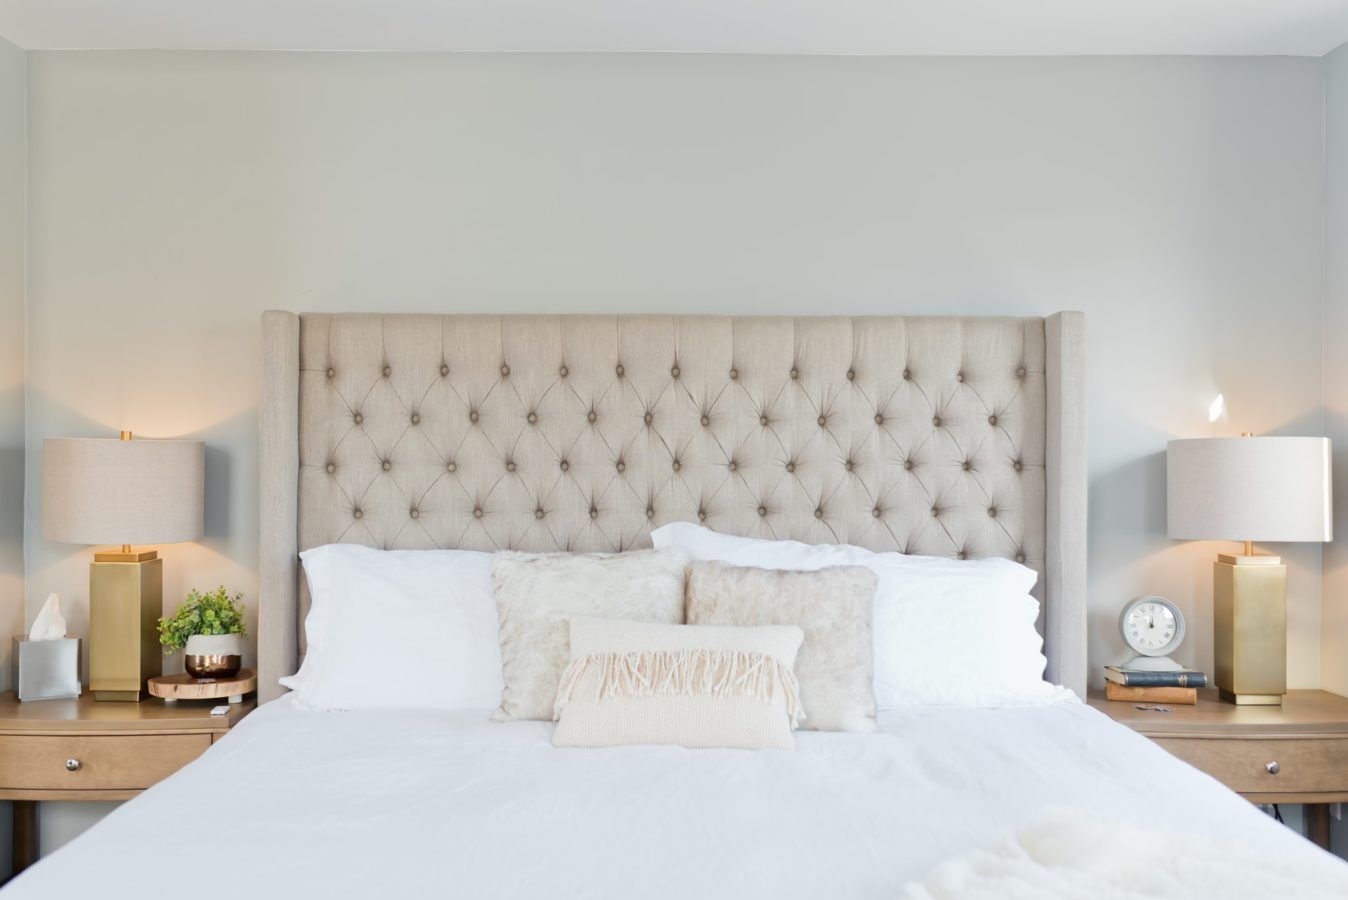 How to build a perfect modern bedroom according to Scha Alyahya